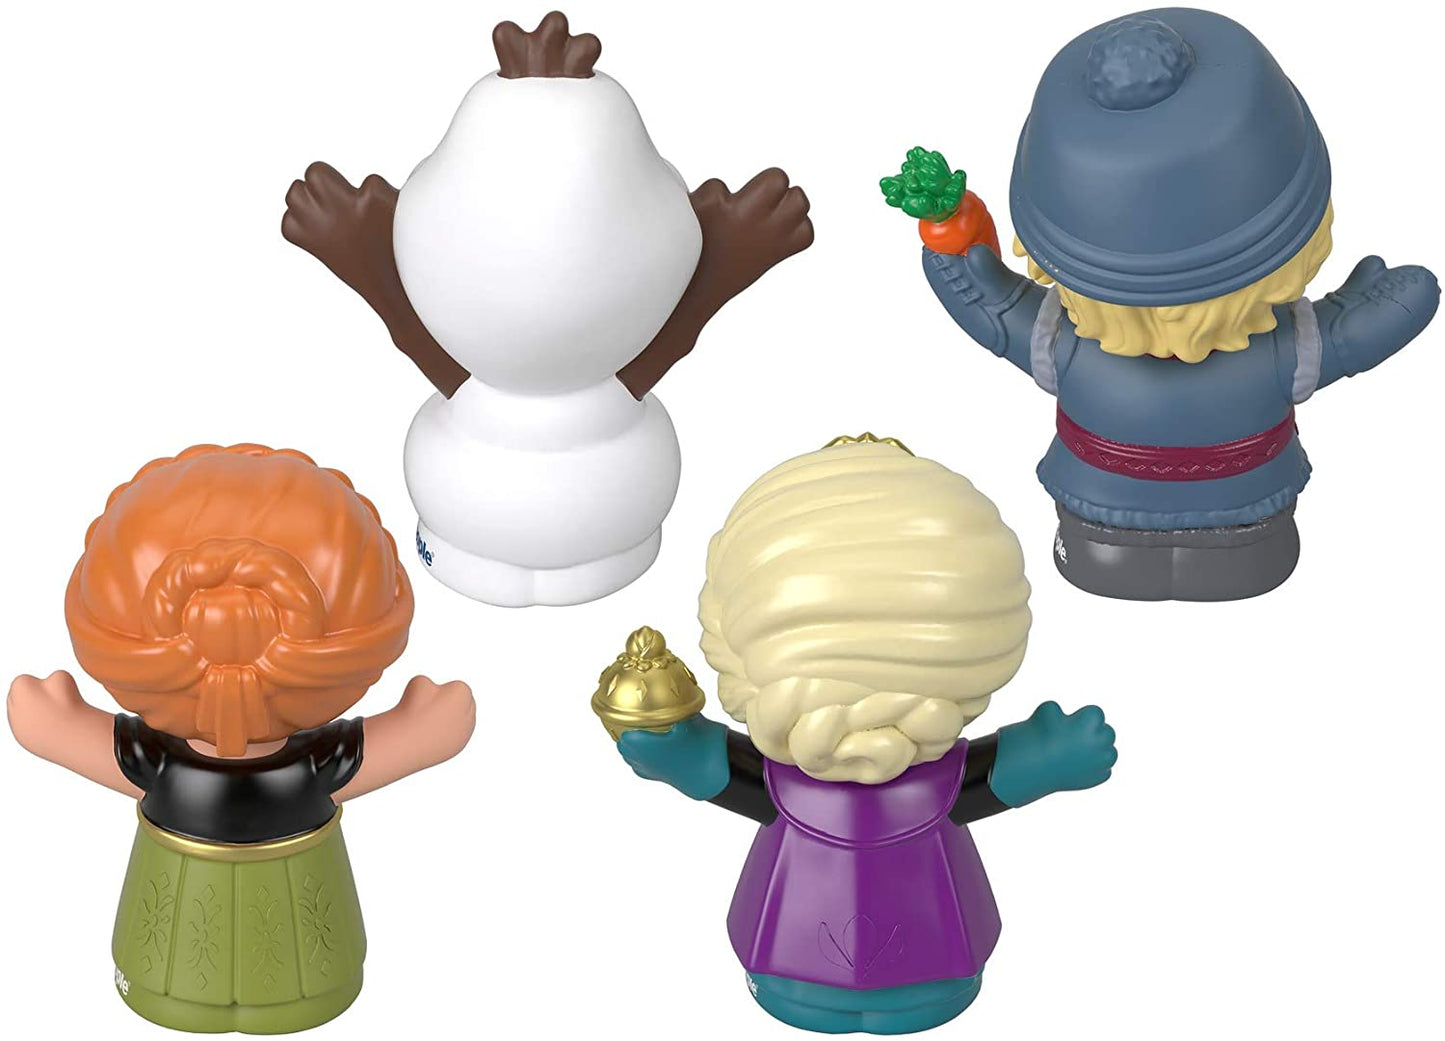 Disney Fisher-Price Frozen Elsa & Friends by Little People, Figure 4-Pack For Toddlers and Preschoolers